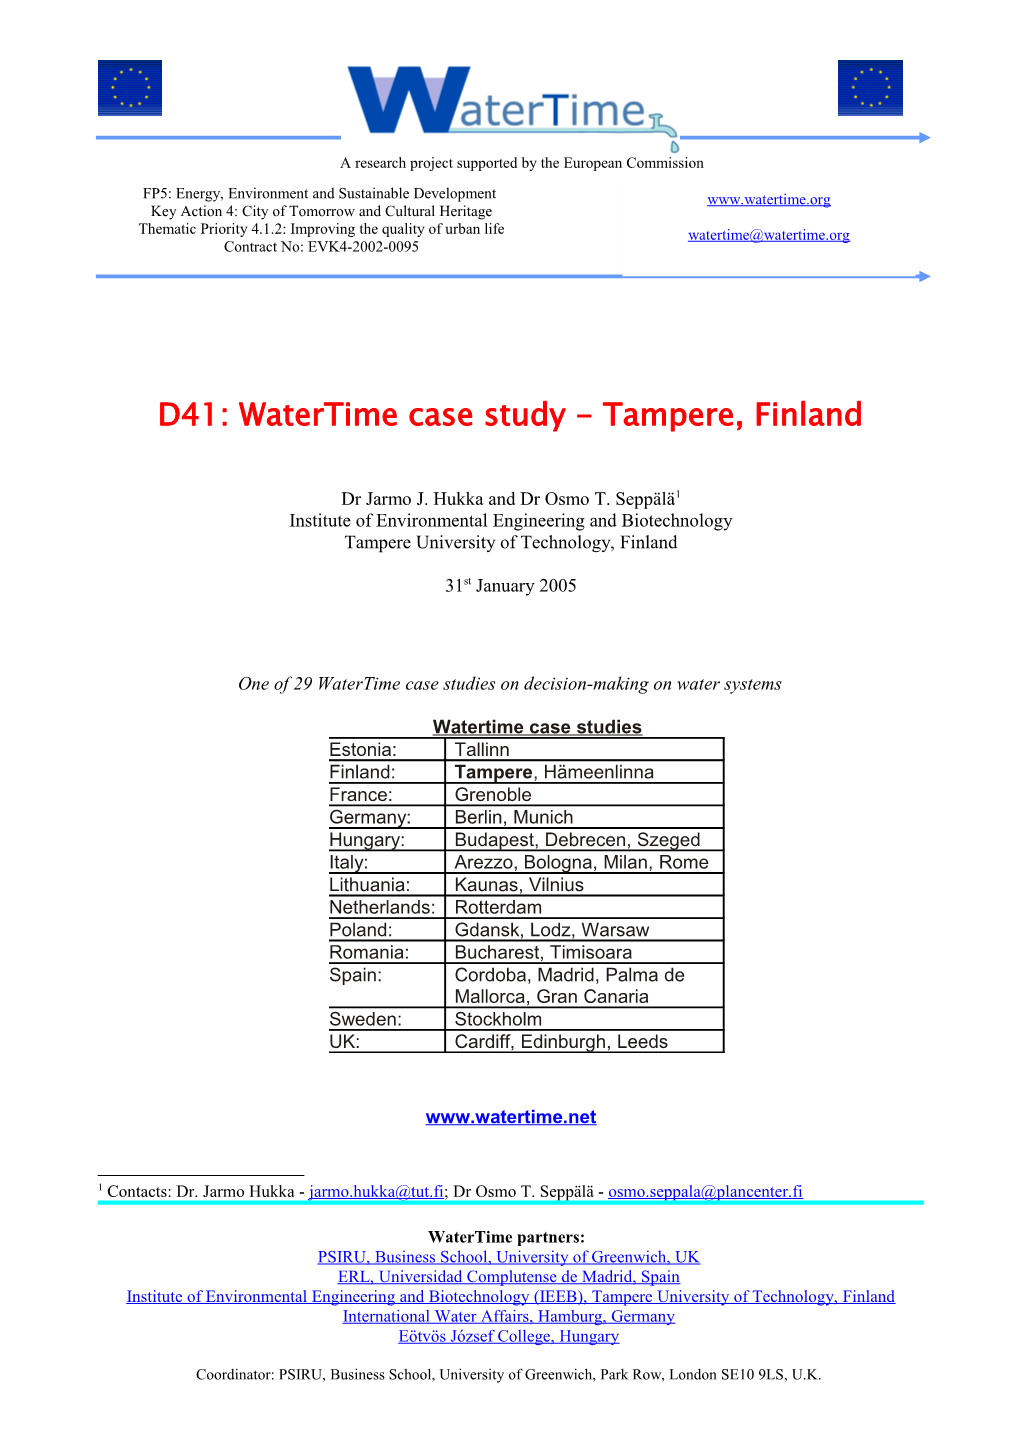 D41: Watertime Case Study - Tampere, Finland